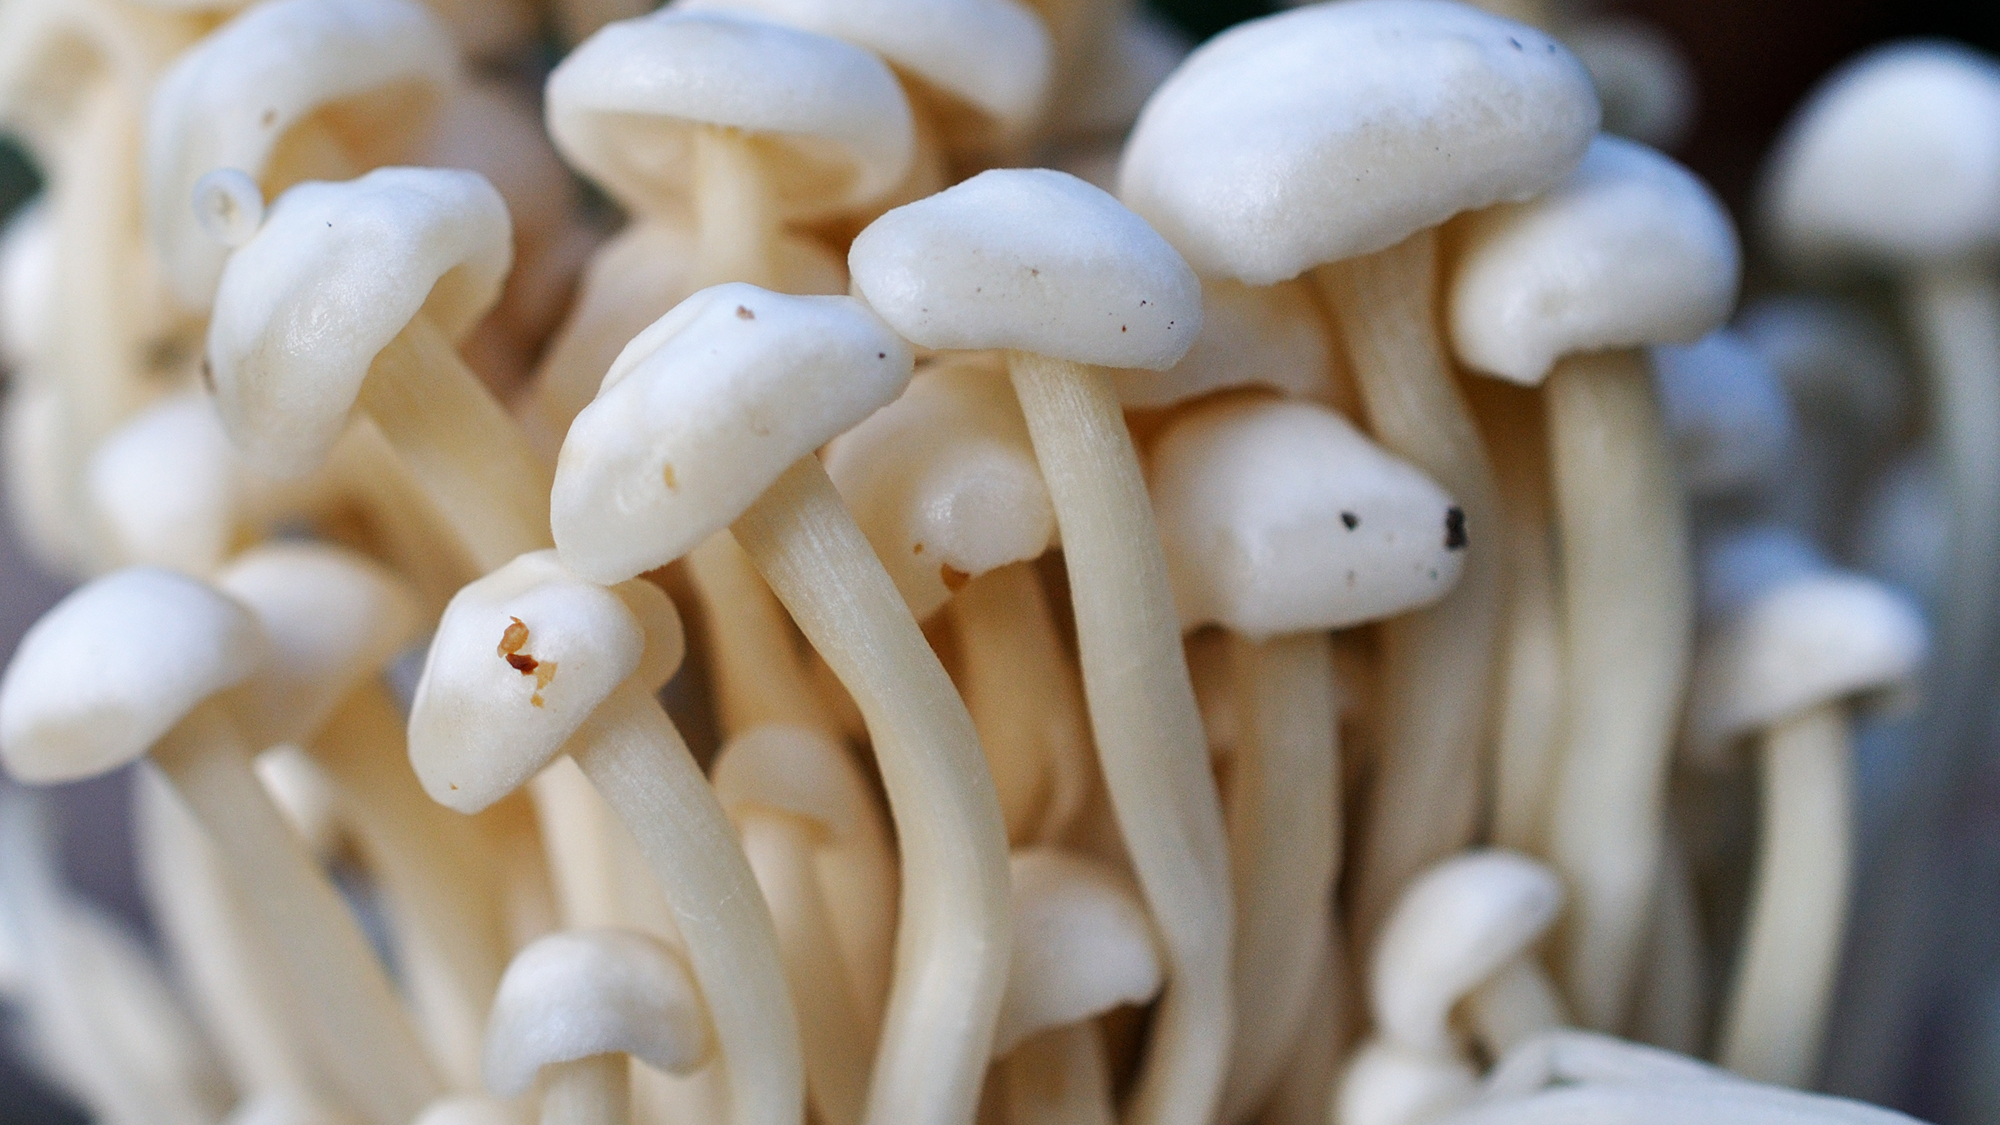 What are the medicinal benefits of mushrooms? 